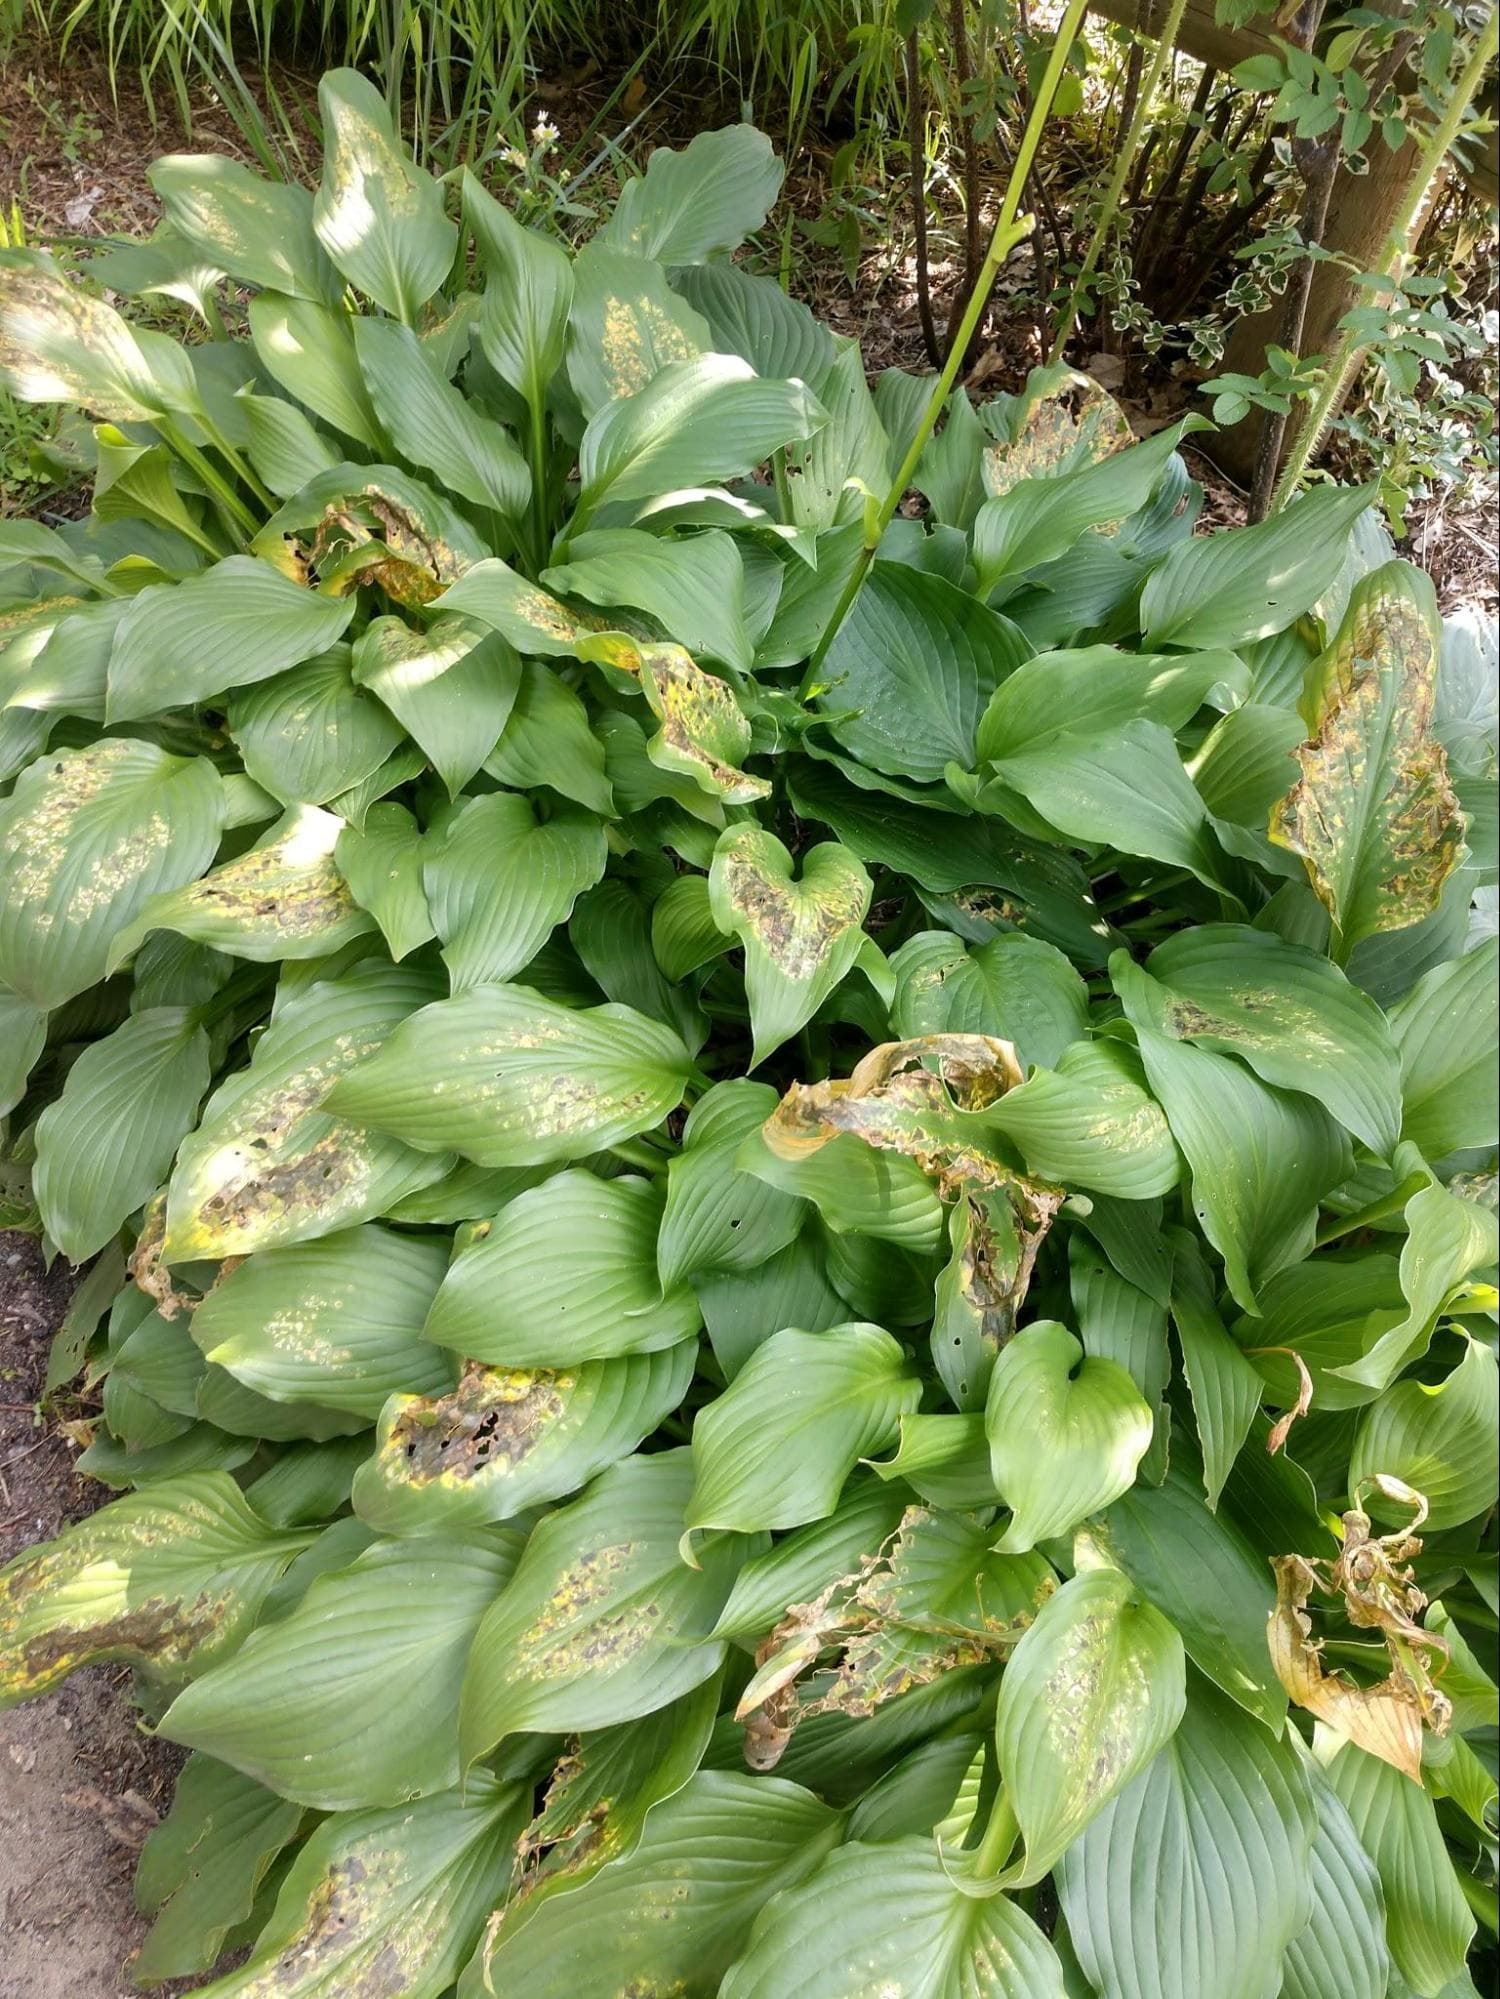 Slug damage to a hosta can cause plants to be unsightly, but usually won't kill them. (Dave Epstein)